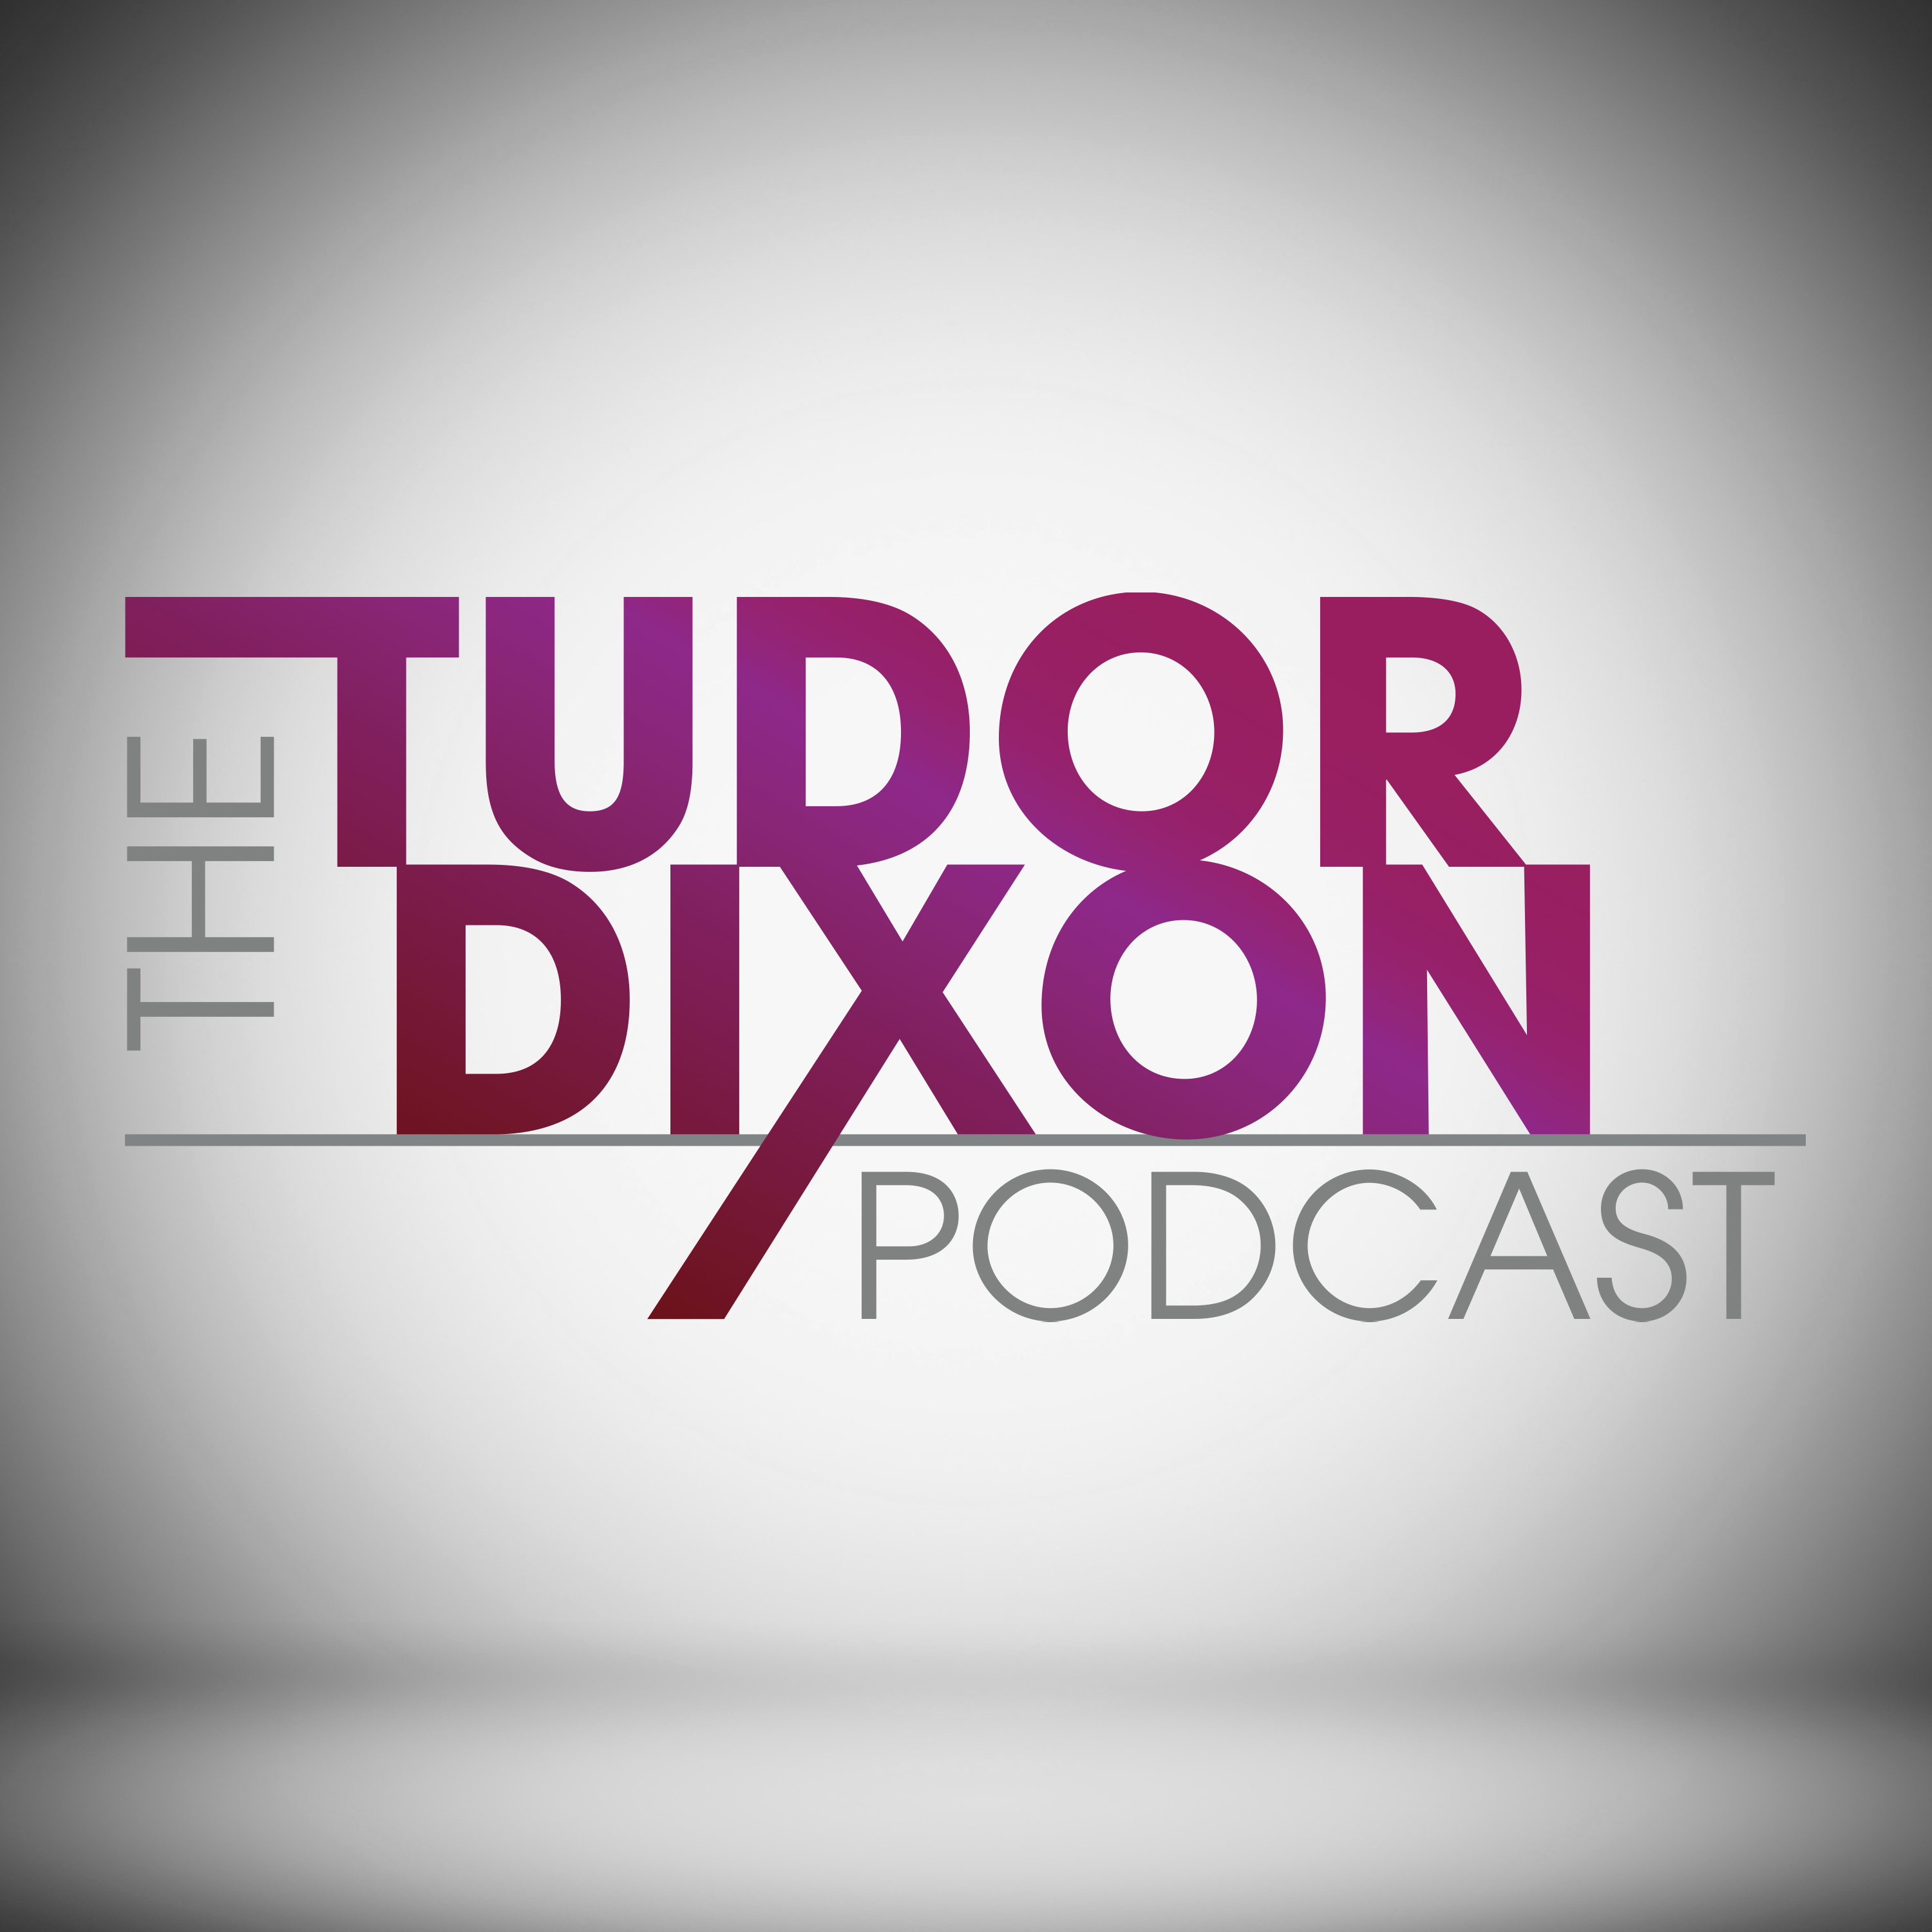 The Tudor Dixon Podcast: Have We Made Parenting Harder Than It Should Be?